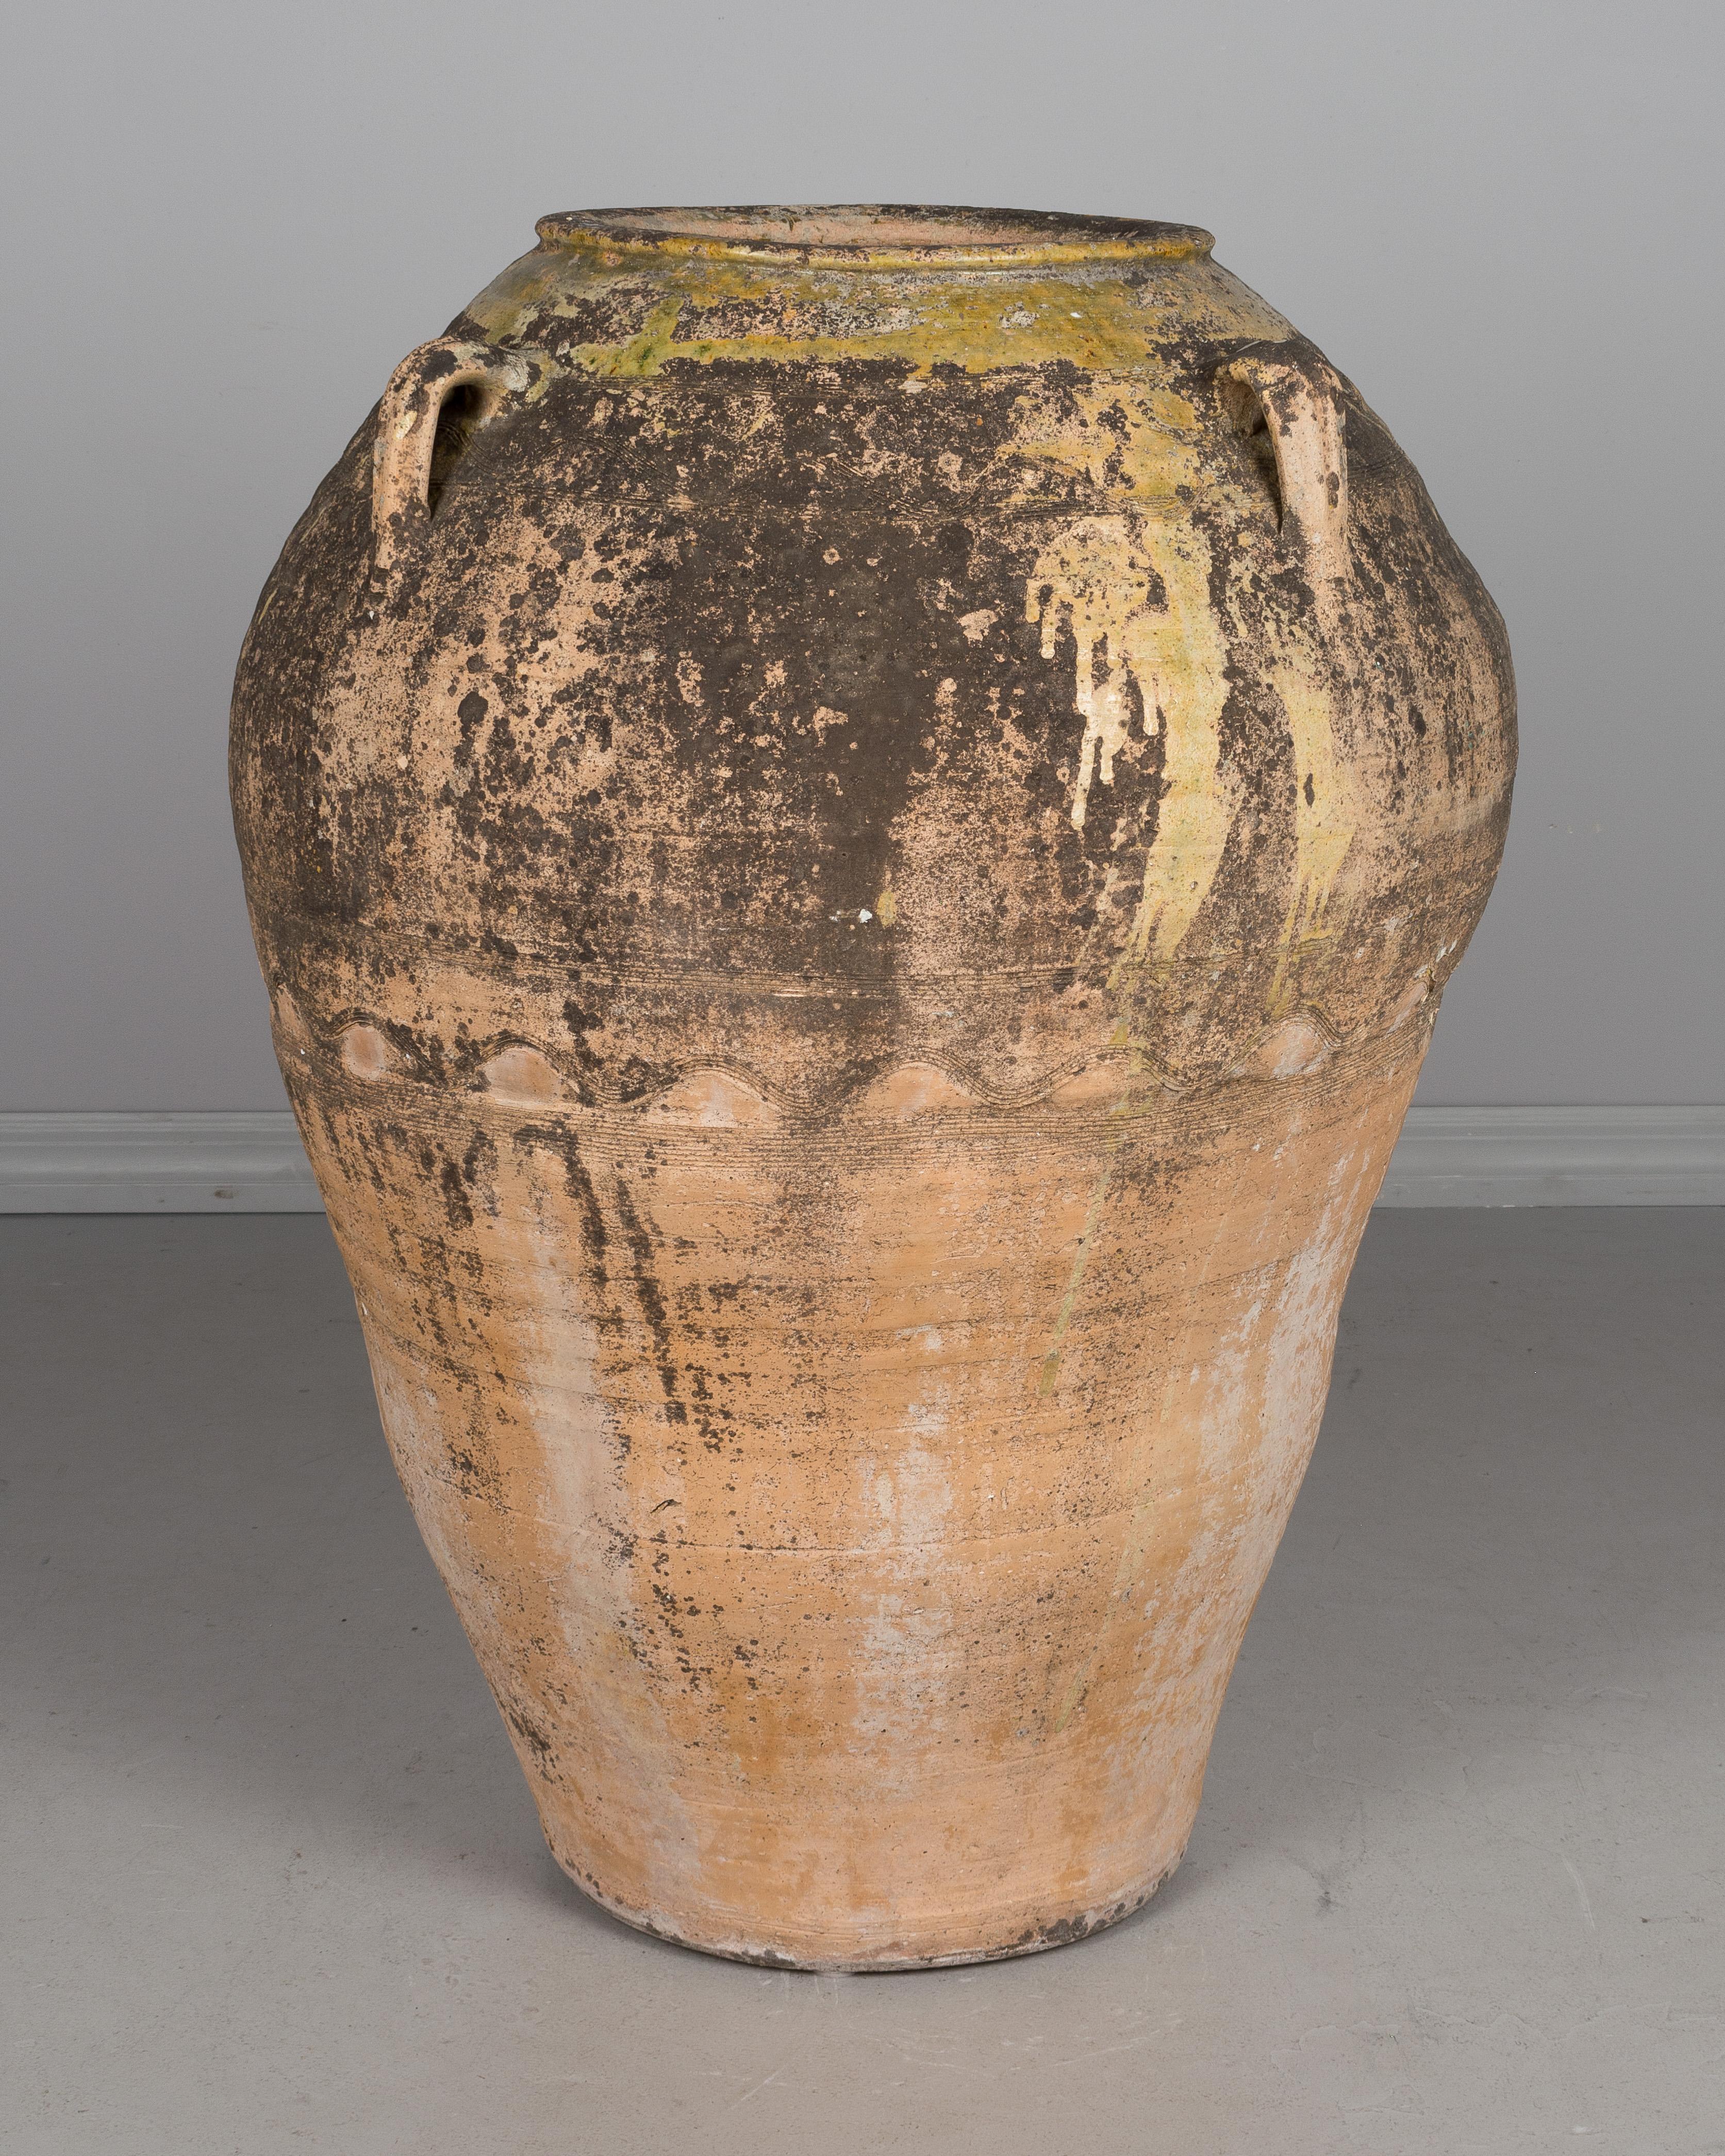 A large Grecian terracotta urn used for storing olives, from the island of Crete. Hand formed with four handles and decorative bands of incised lines. Old mossy patina with remnants of greenish yellow glaze at the top. A nice sculptural element for